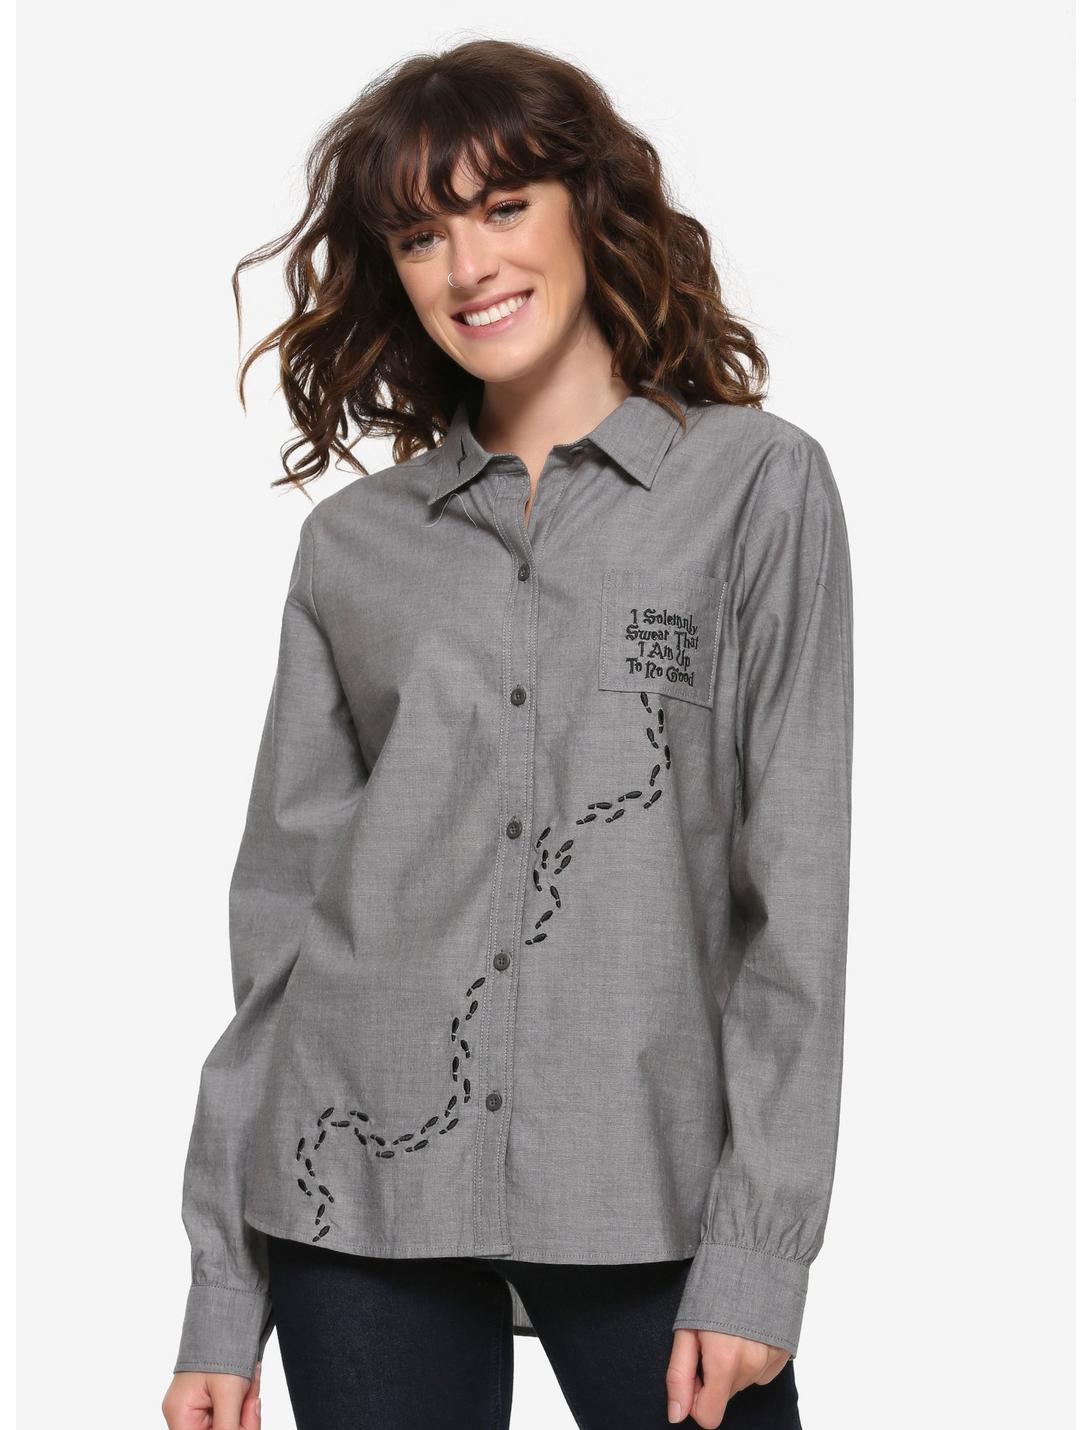 Harry Potter Up to No Good Women's Woven Button-Up - BoxLunch Exclusive, CHARCOAL, hi-res